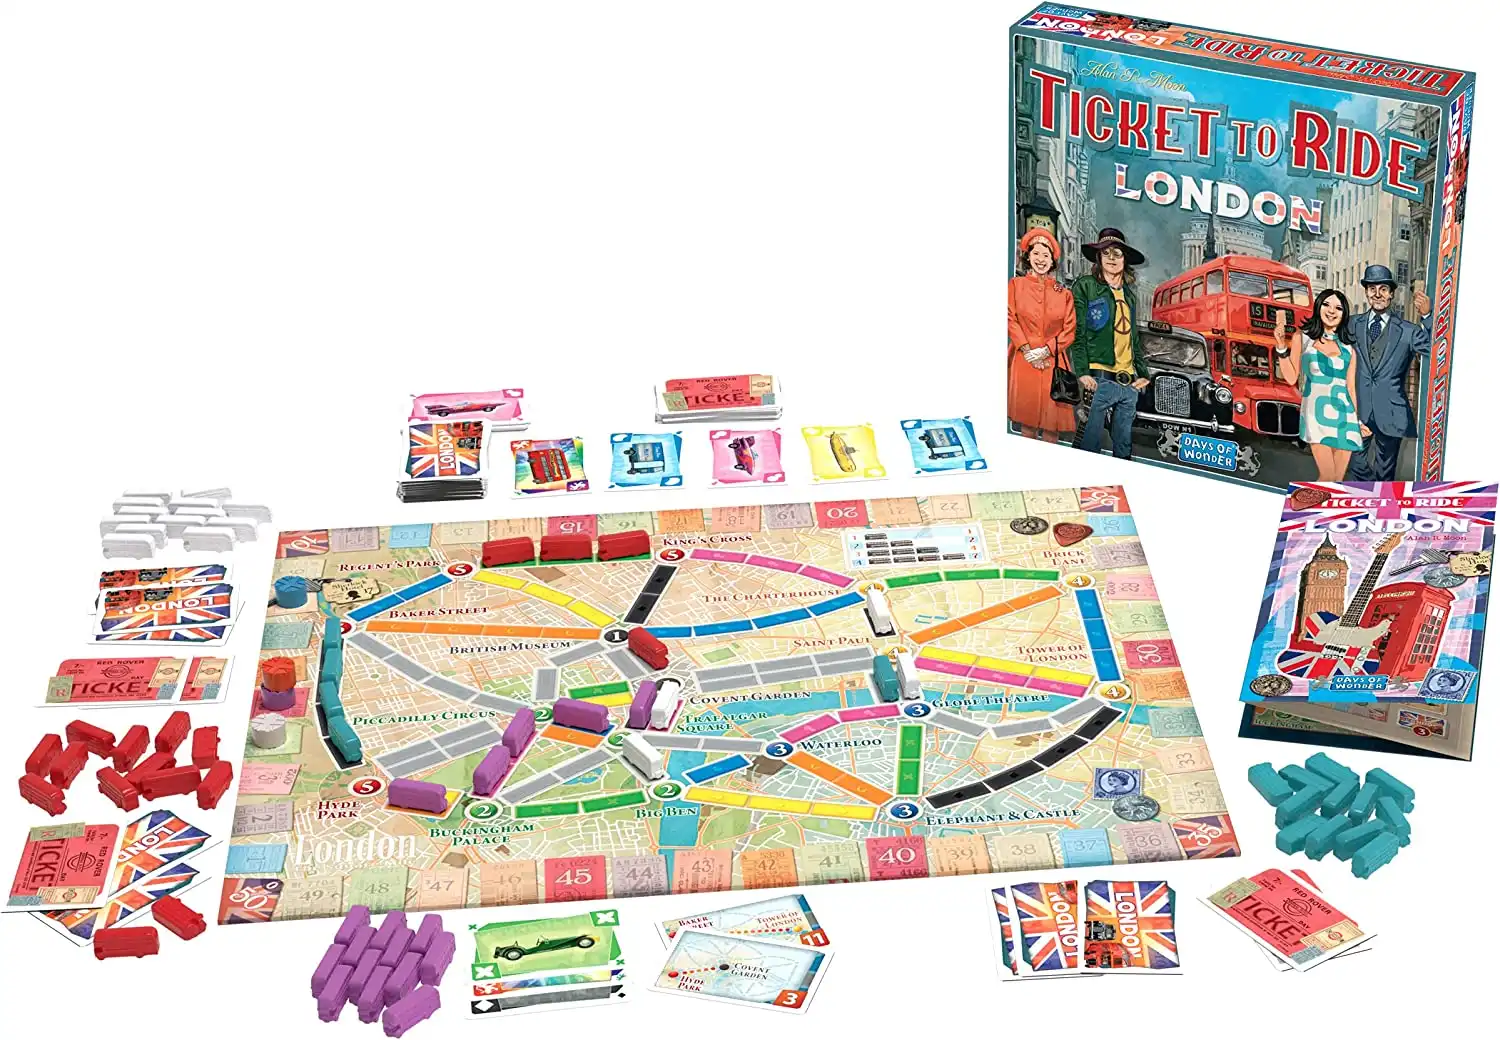 Ticket to Ride: London (2019) board game components